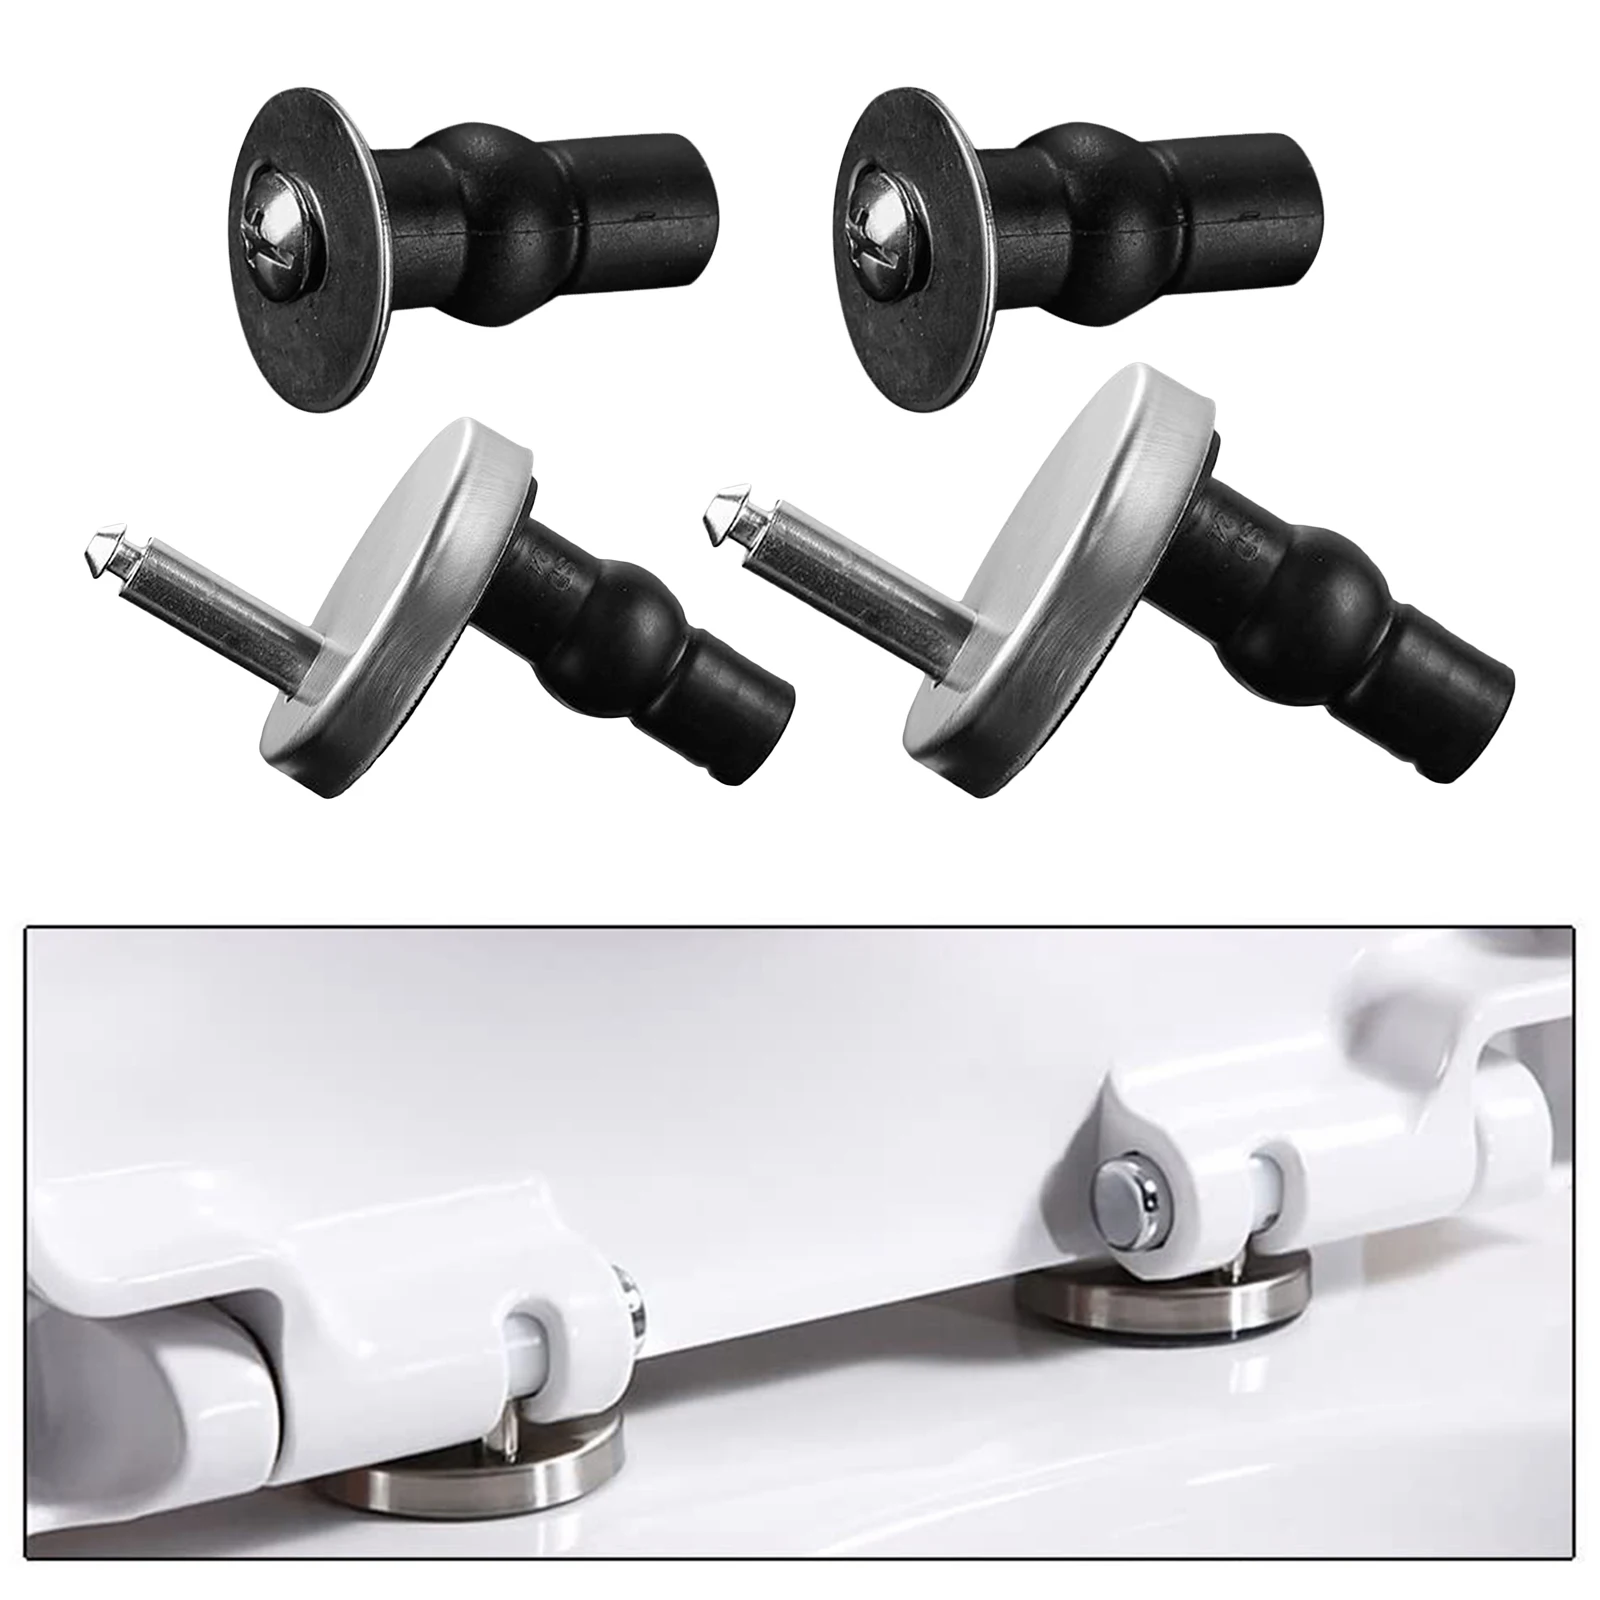 Replacement Toilet Seat Hinge Fitting Screw Anchoring Setscrew Fittings 